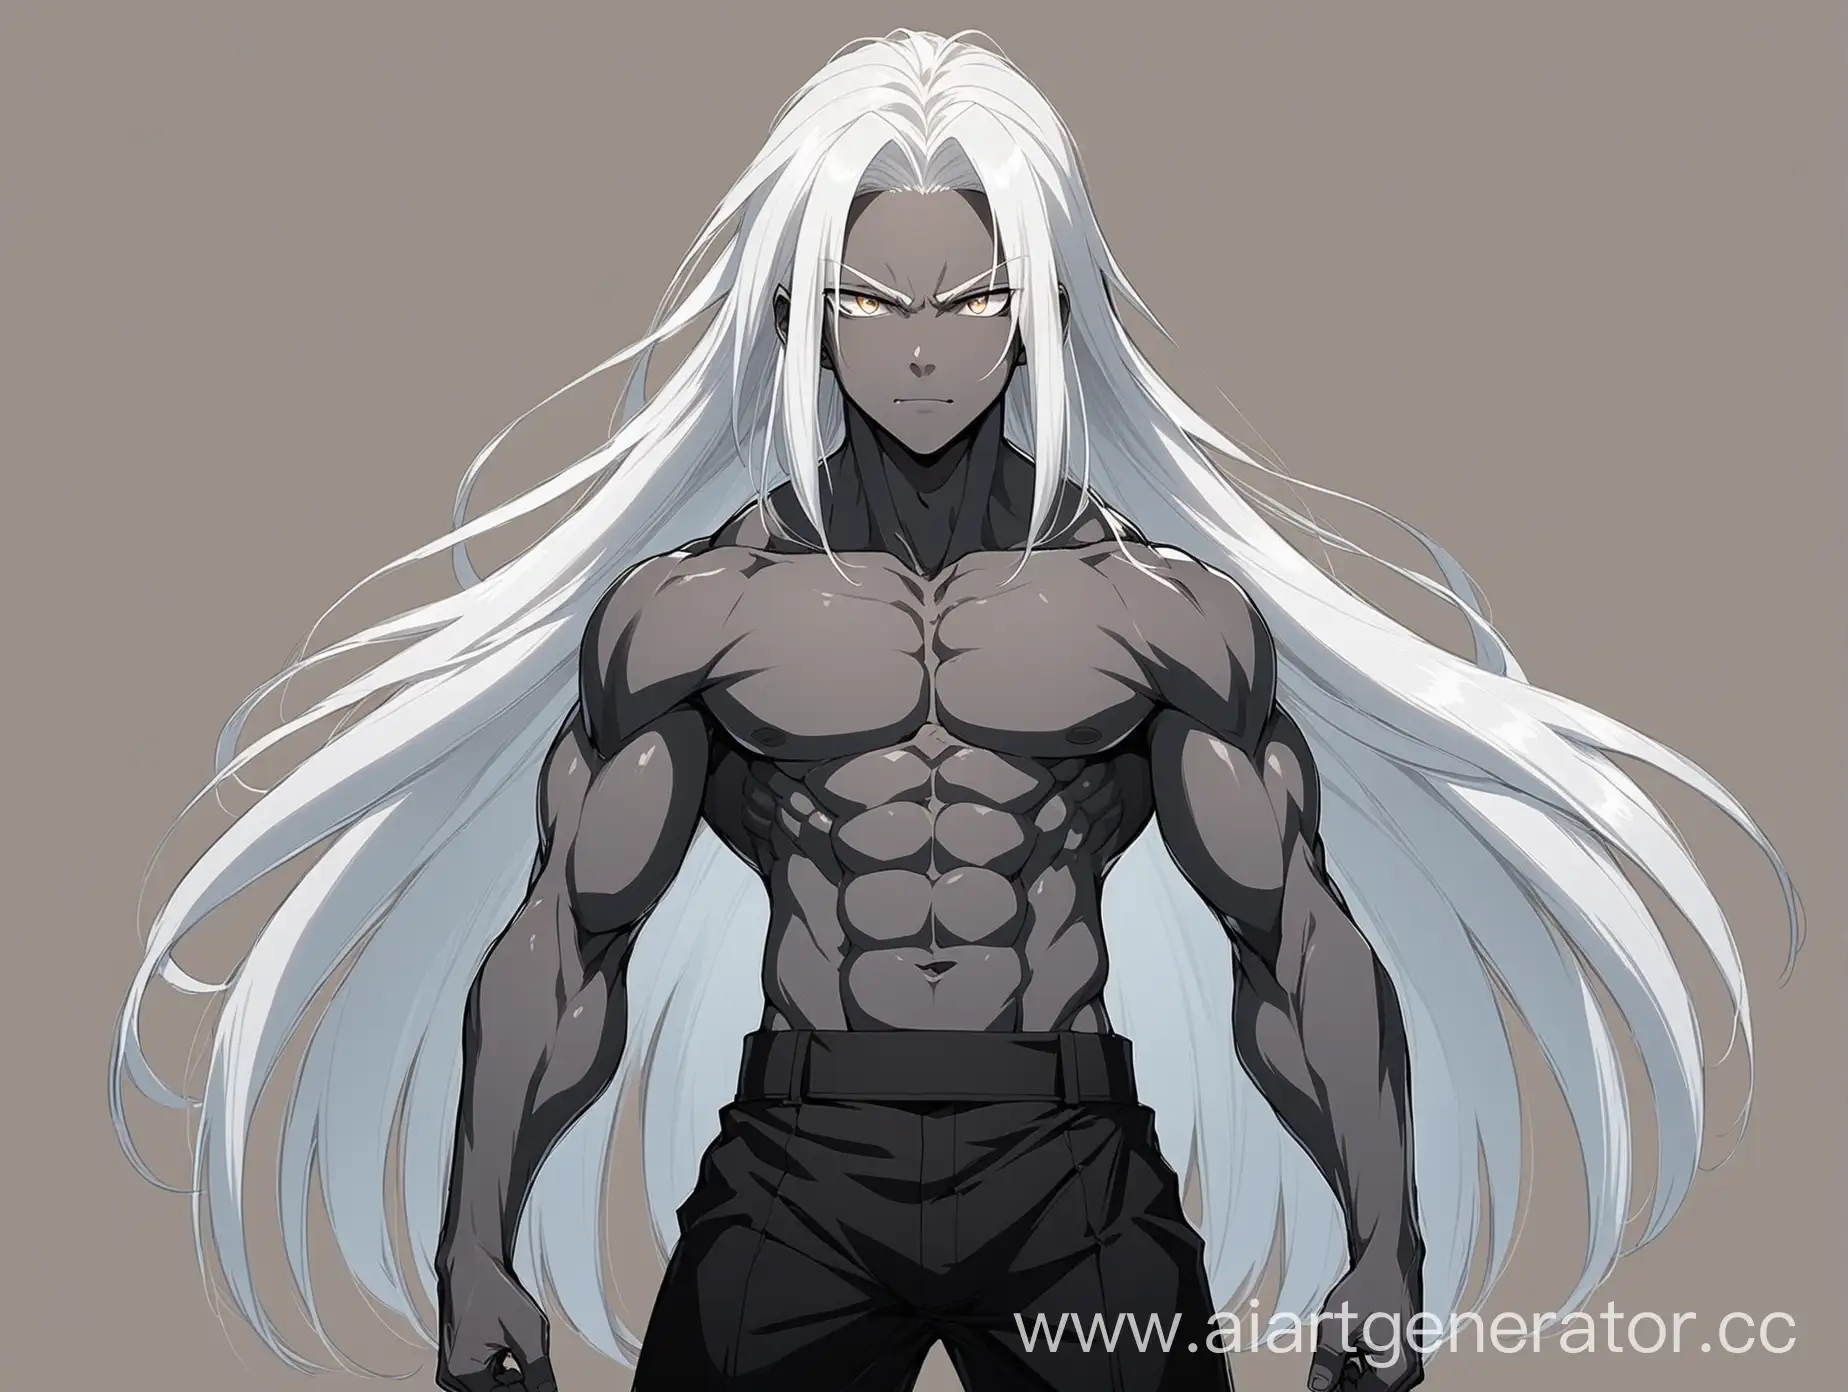 Anime-Style-Boy-Character-with-Gray-Skin-and-Long-White-Hair